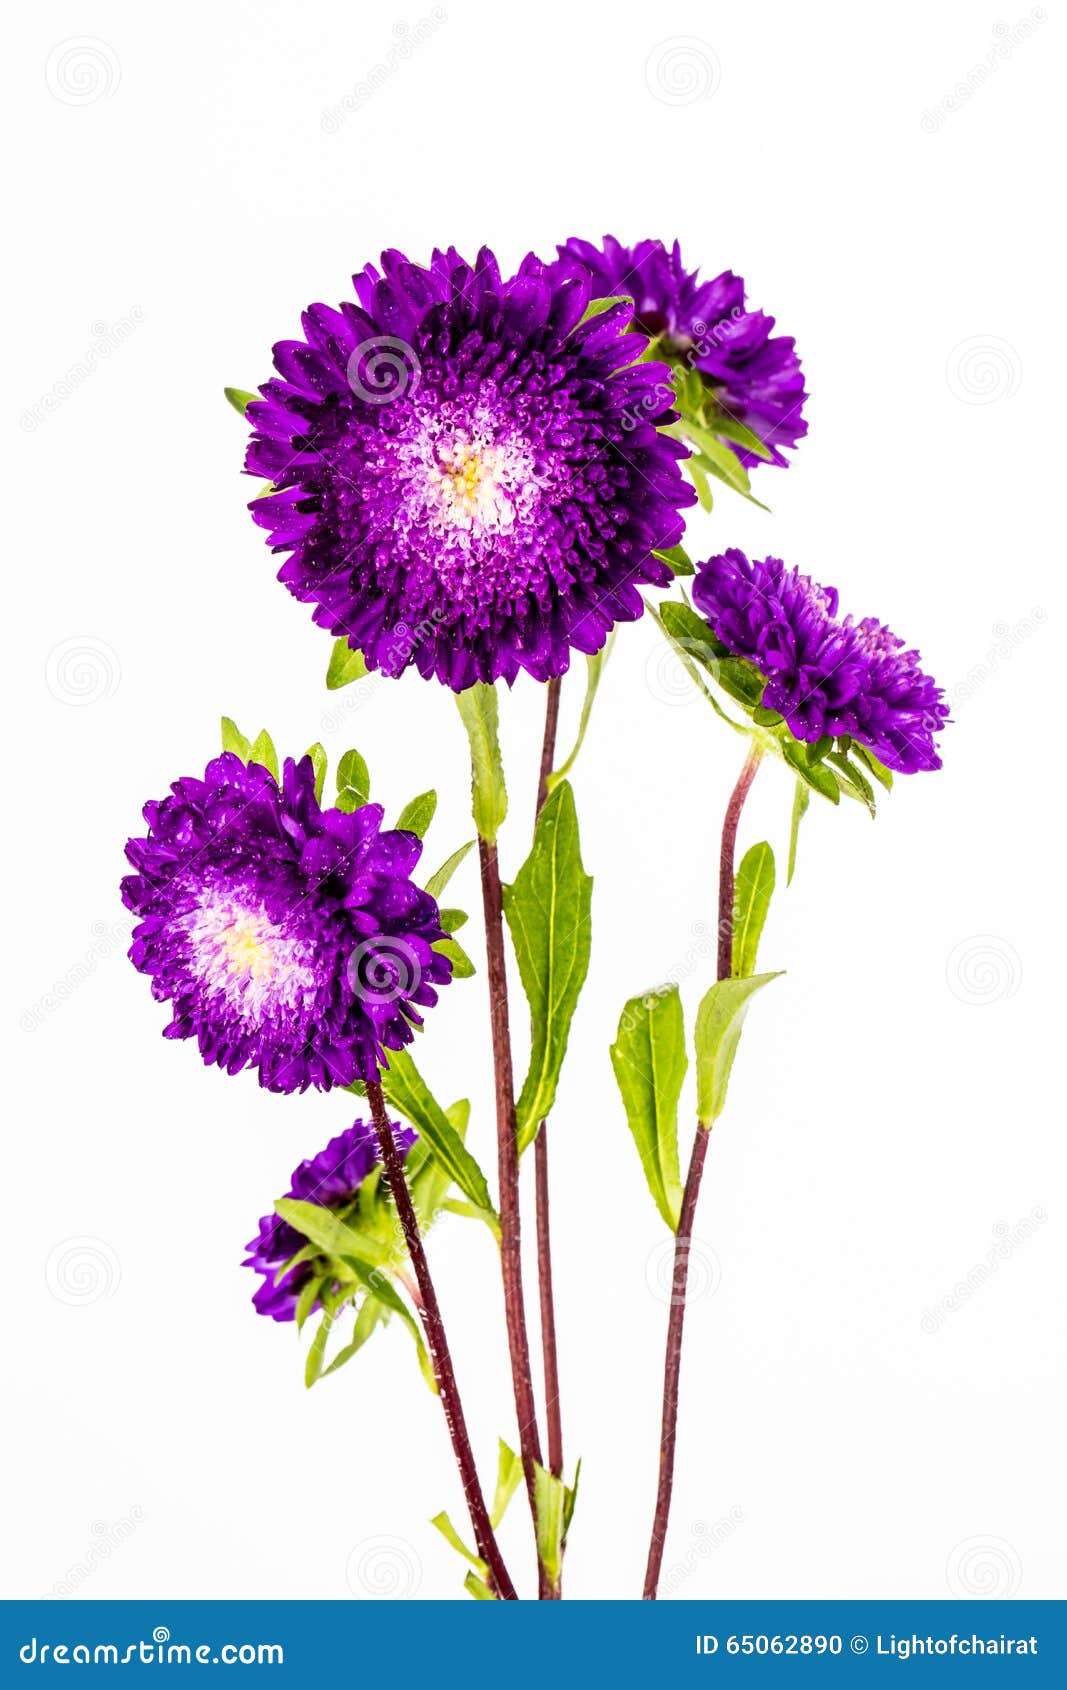 Purple Flower on White Background Stock Photo - Image of blooming